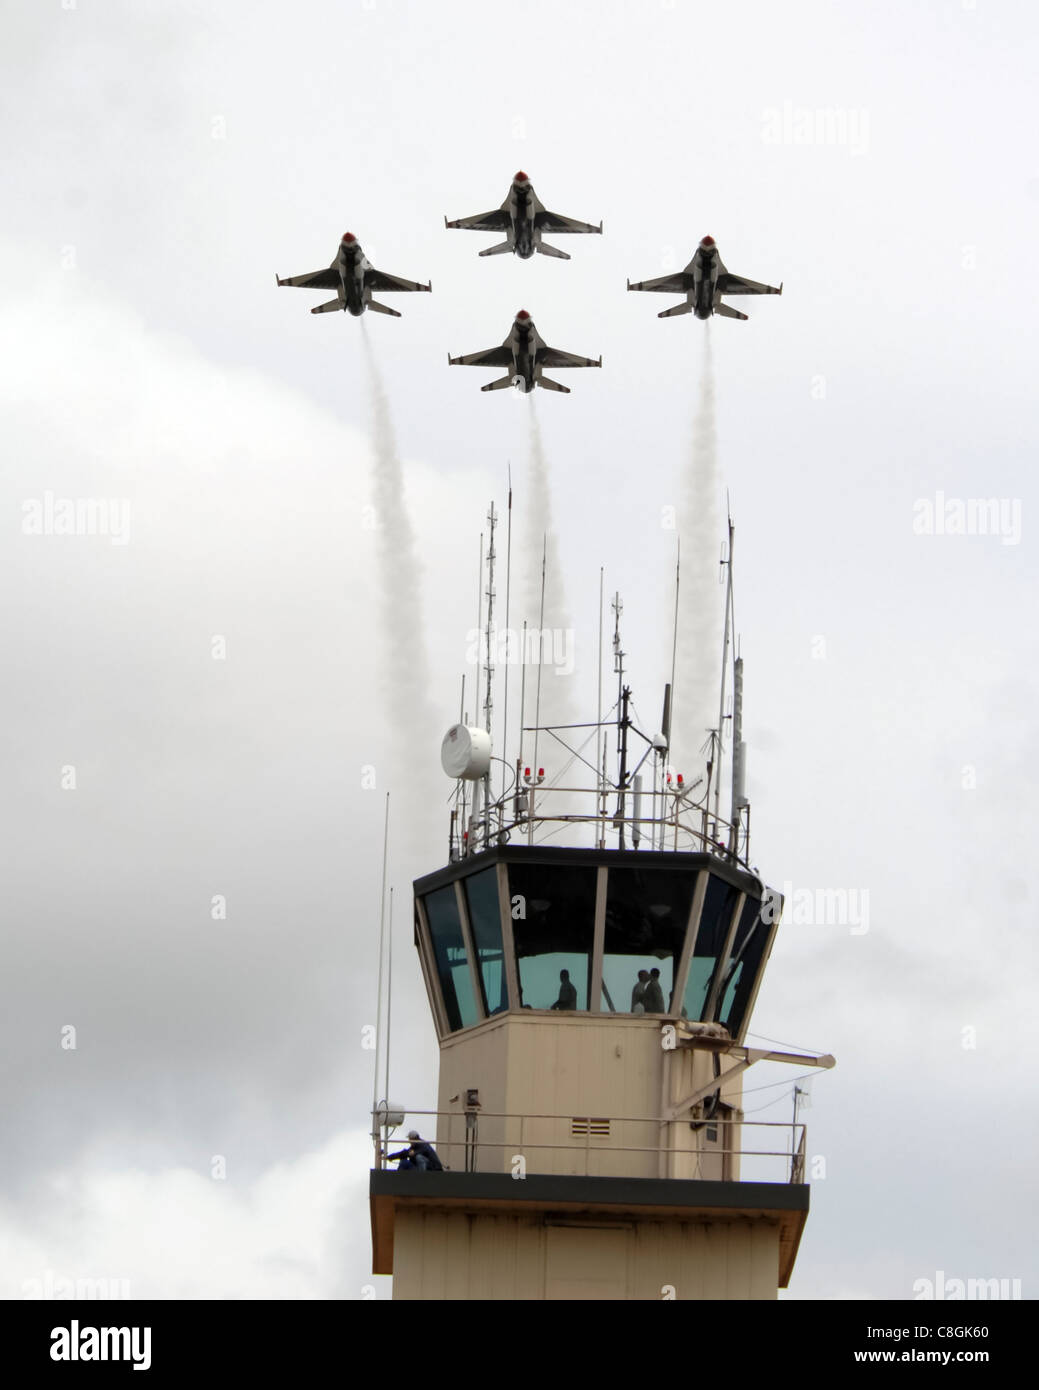 The U.S. Air Force Thunderbirds flight demonstration team flies over the Red-Flag Alaska tower during the 2008 'Soaring into Solstice' Thunderbirds Show June 24 at Eielson Air Force Base, Alaska, June 24. The Thunderbirds are assigned to the U.S. Air Force Air Demonstration Squadron at Nellis AFB, Nev. Stock Photo